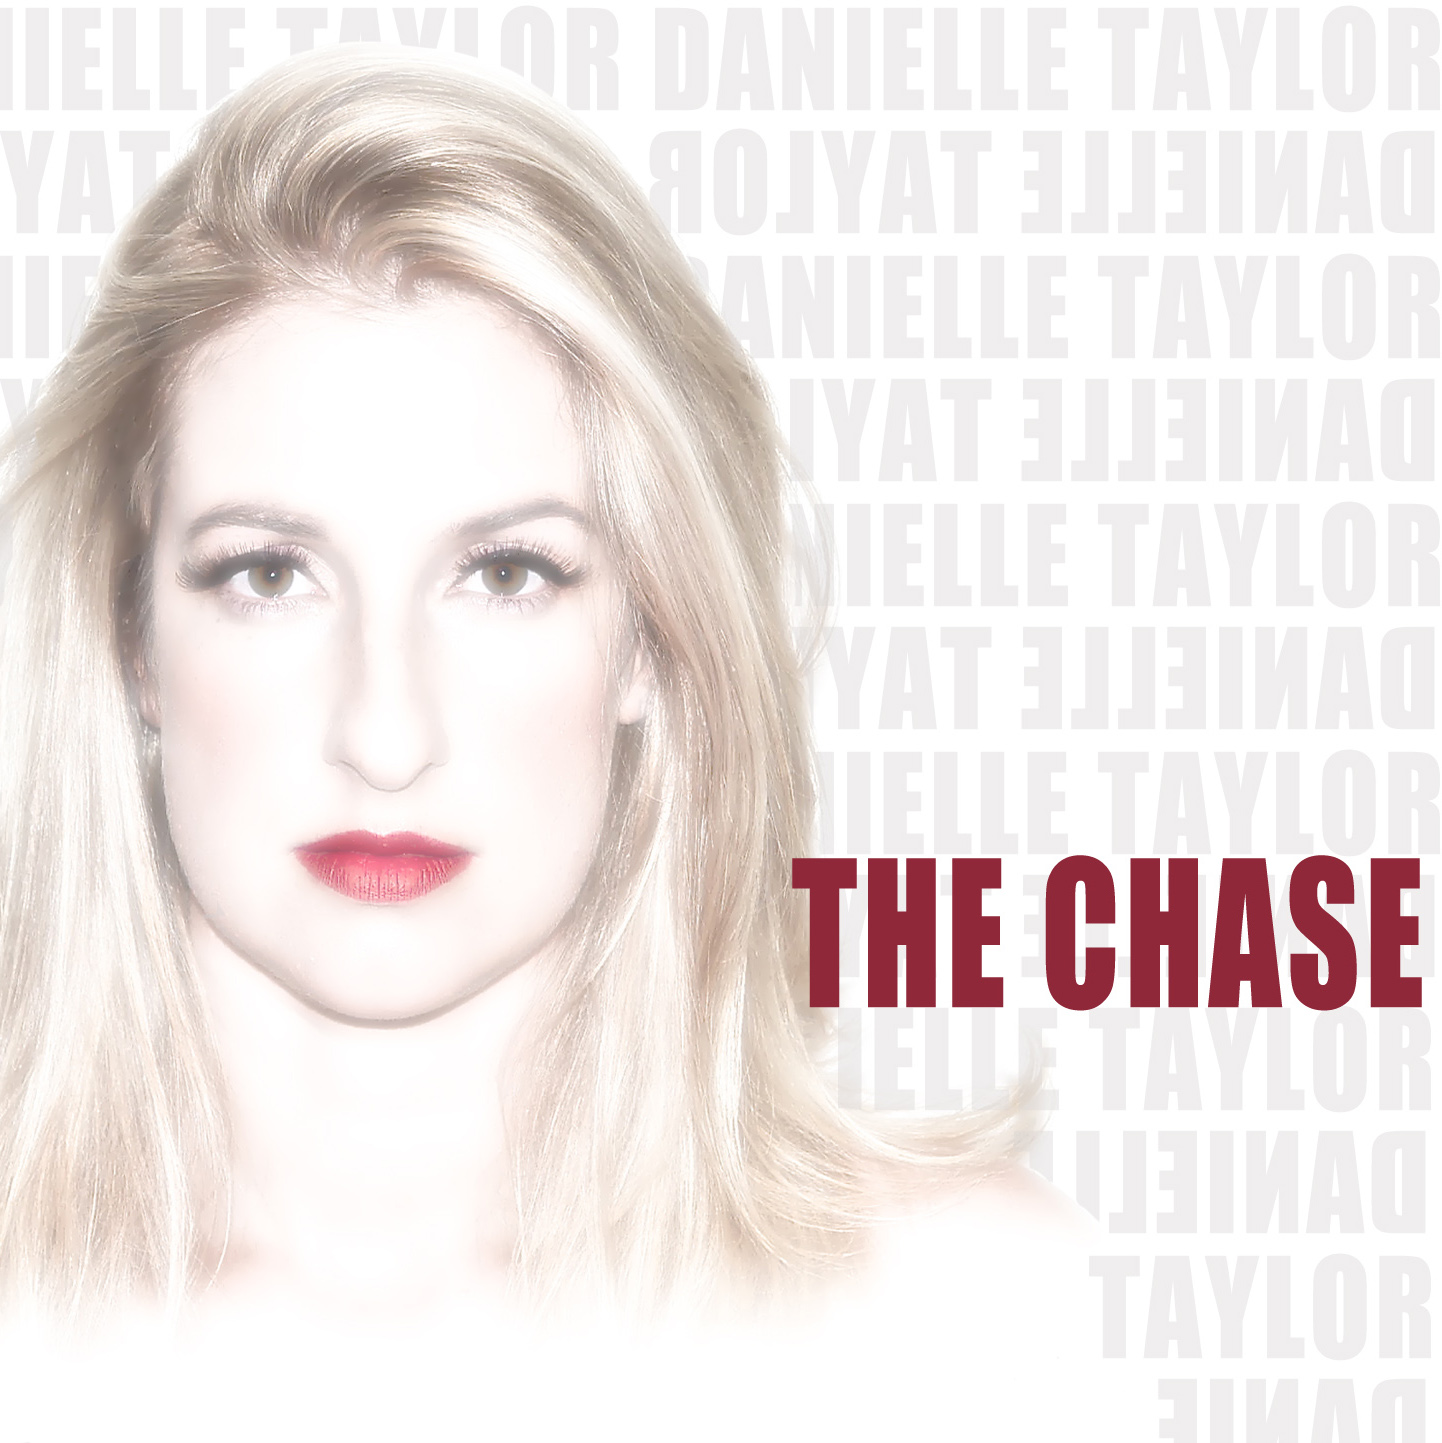  Danielle Taylor – The Chase